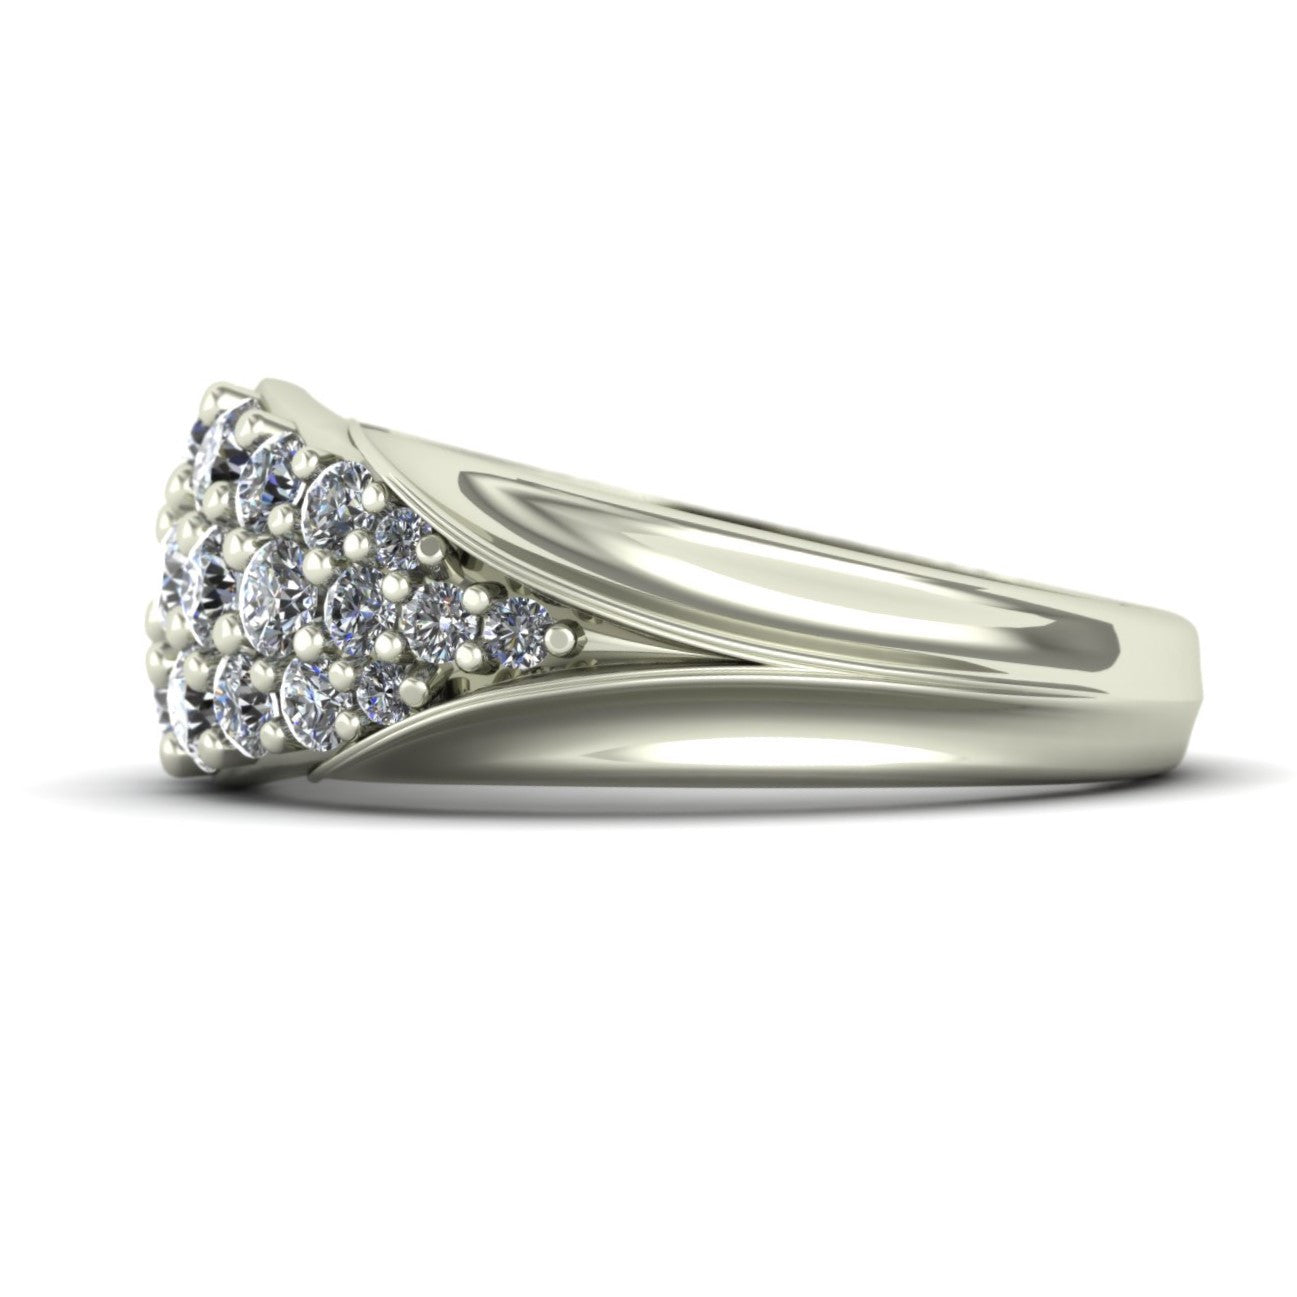 One carat diamond pavé band in 14k white gold - Charles Babb Designs - side view